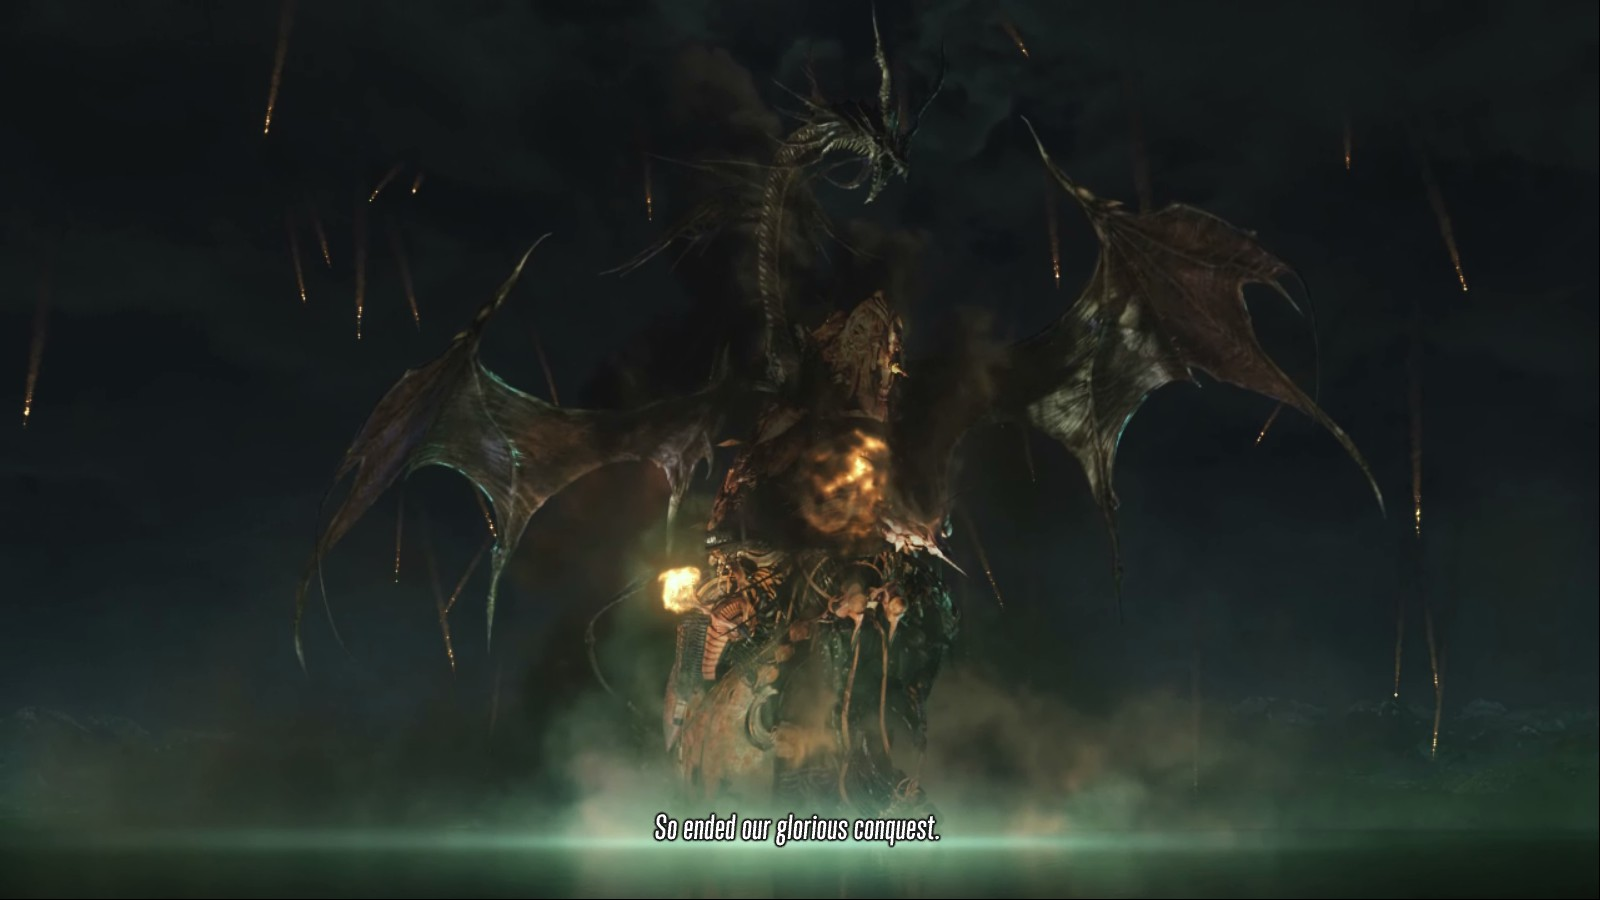 Final Fantasy Xiv A Realm Reborn Impressions Proud To Be An Mmorpg Ars Technica